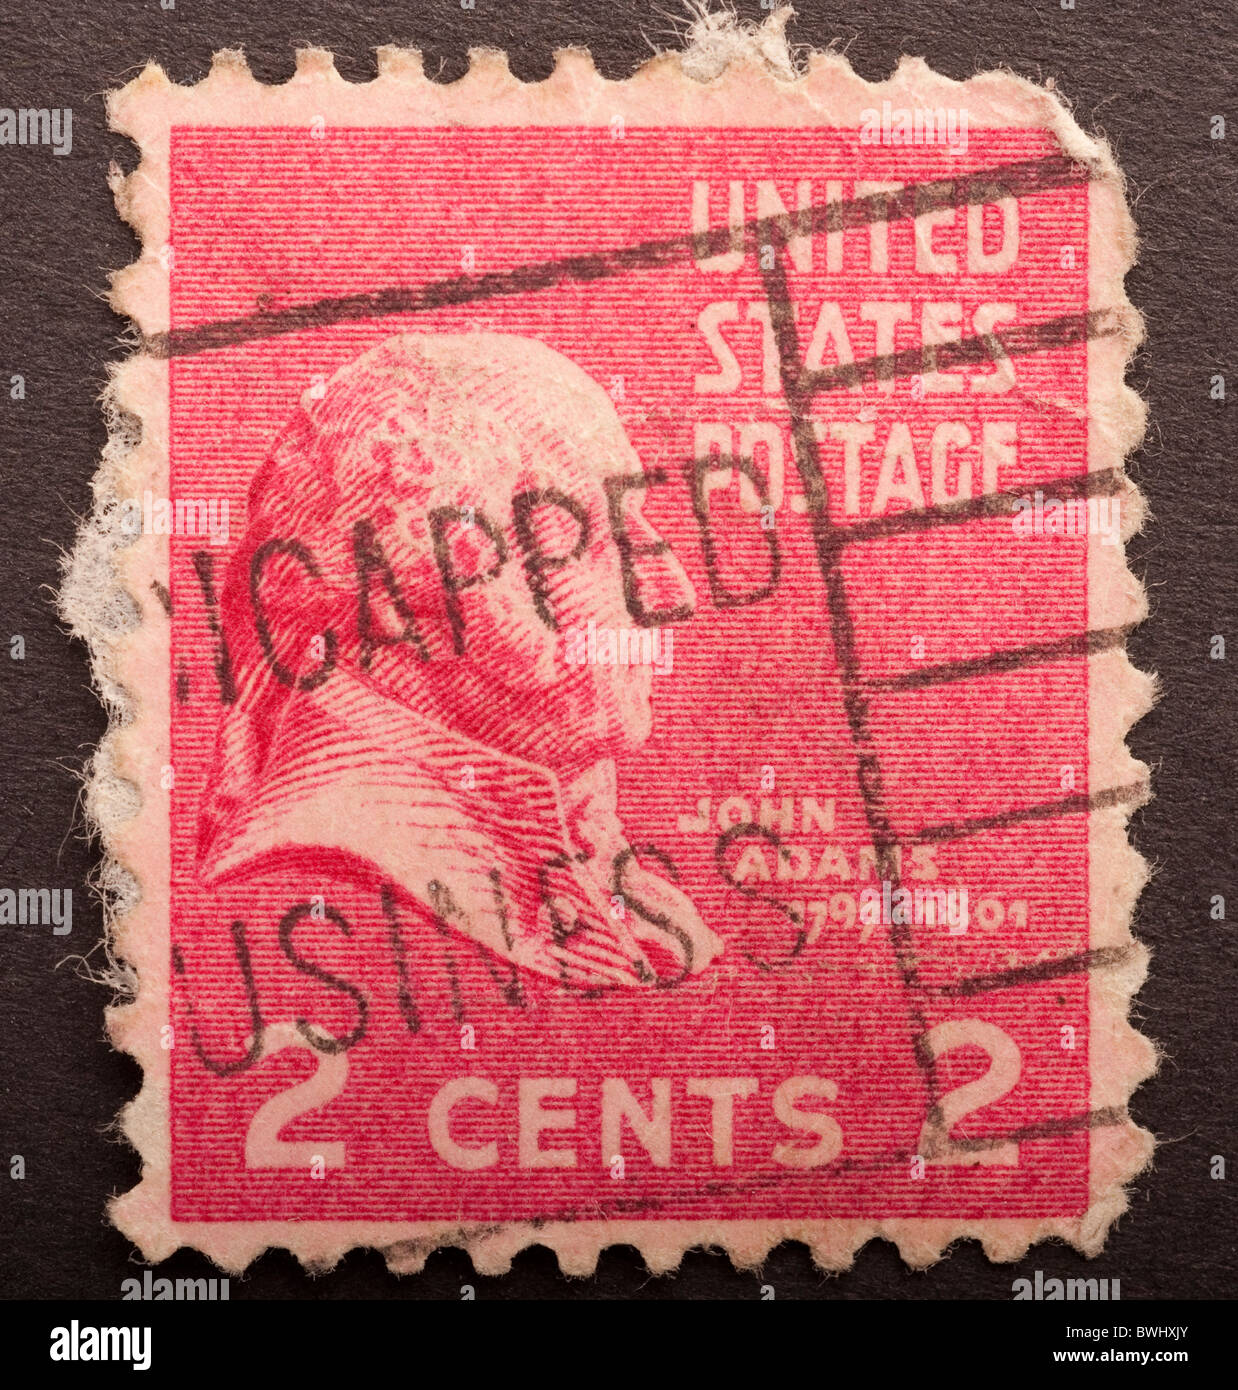 United States Postage 2 cents Banque D'Images